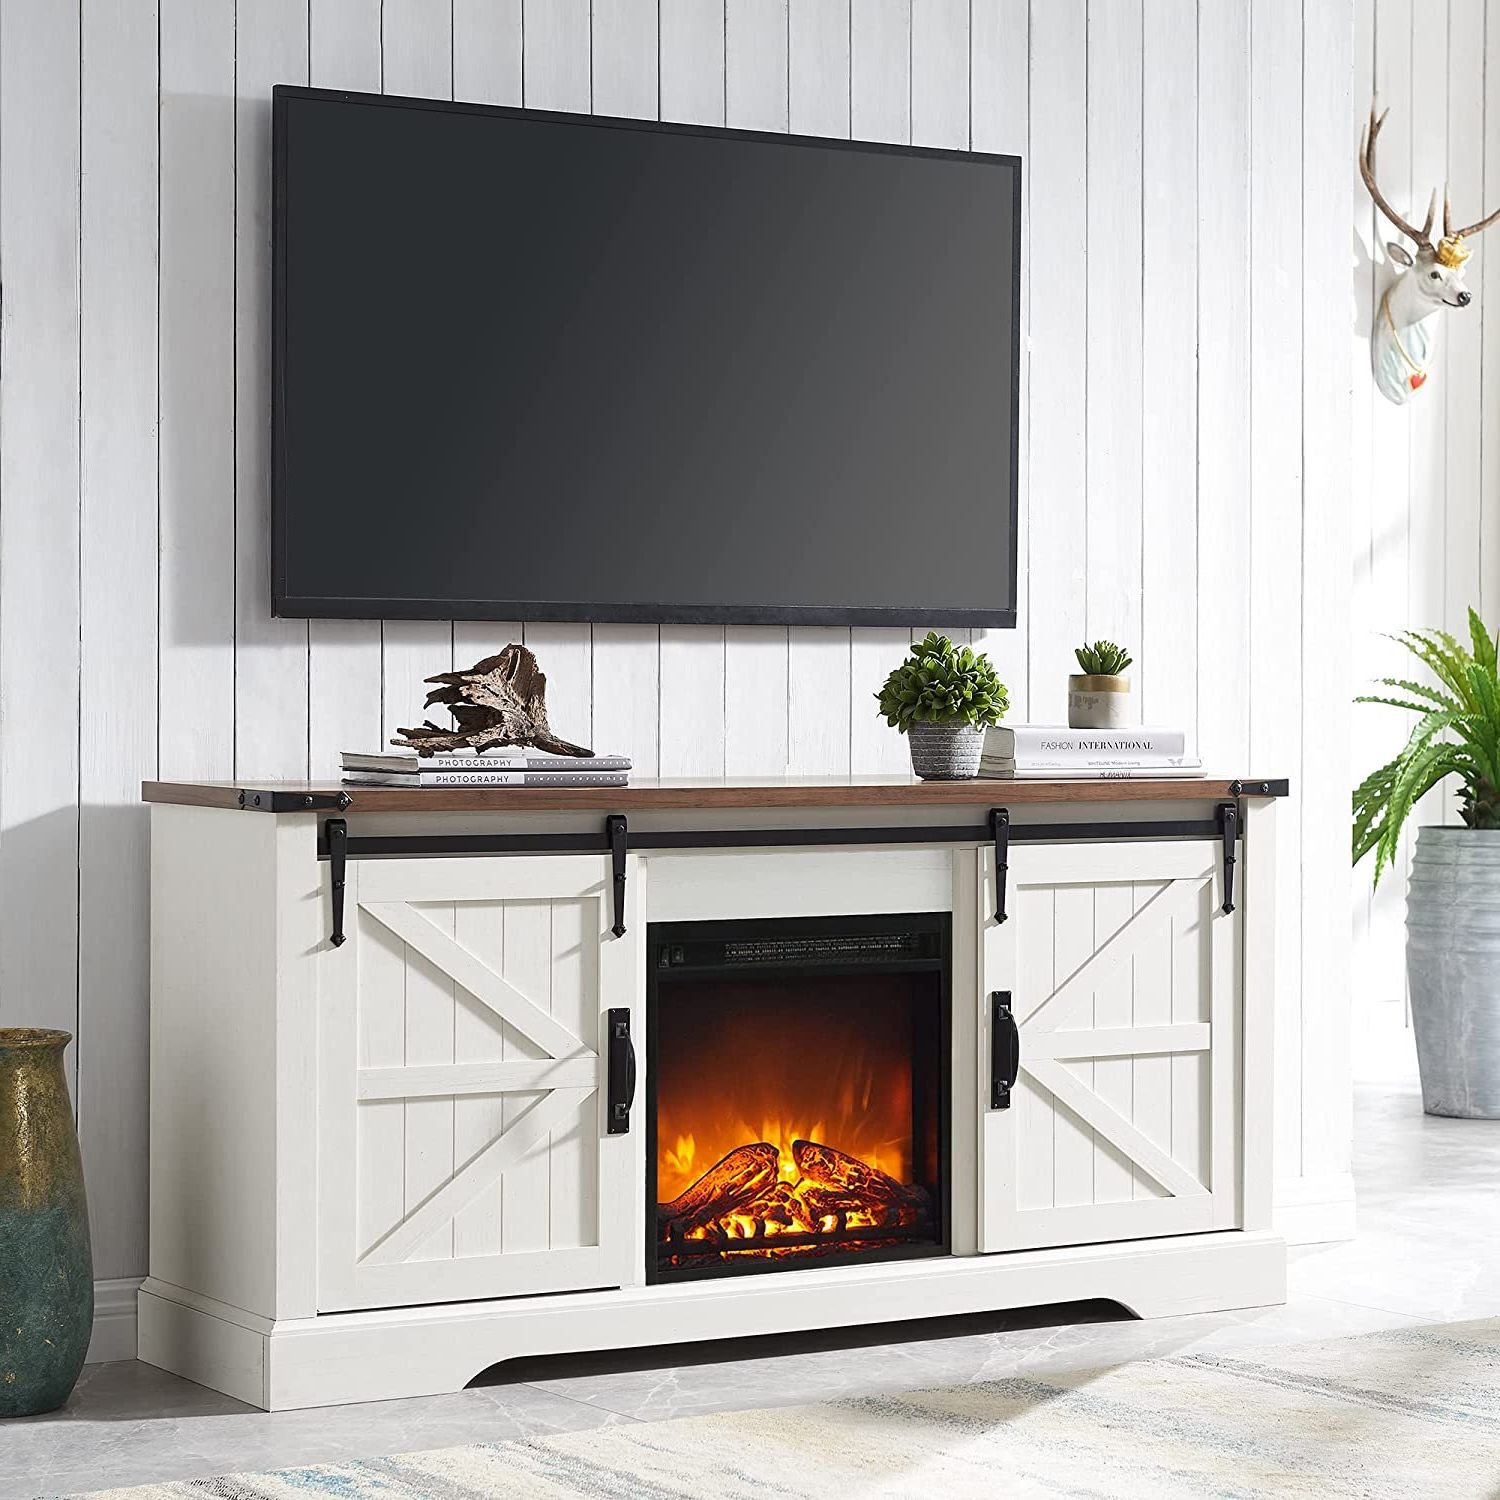 Gracie Oaks Farmhouse Tv Stand For 65 Inch Tv With 18" Electric Fireplace,  Sliding Barn Door, Adjustable Storage & Reviews | Wayfair For Farmhouse Stands With Shelves (Gallery 13 of 20)